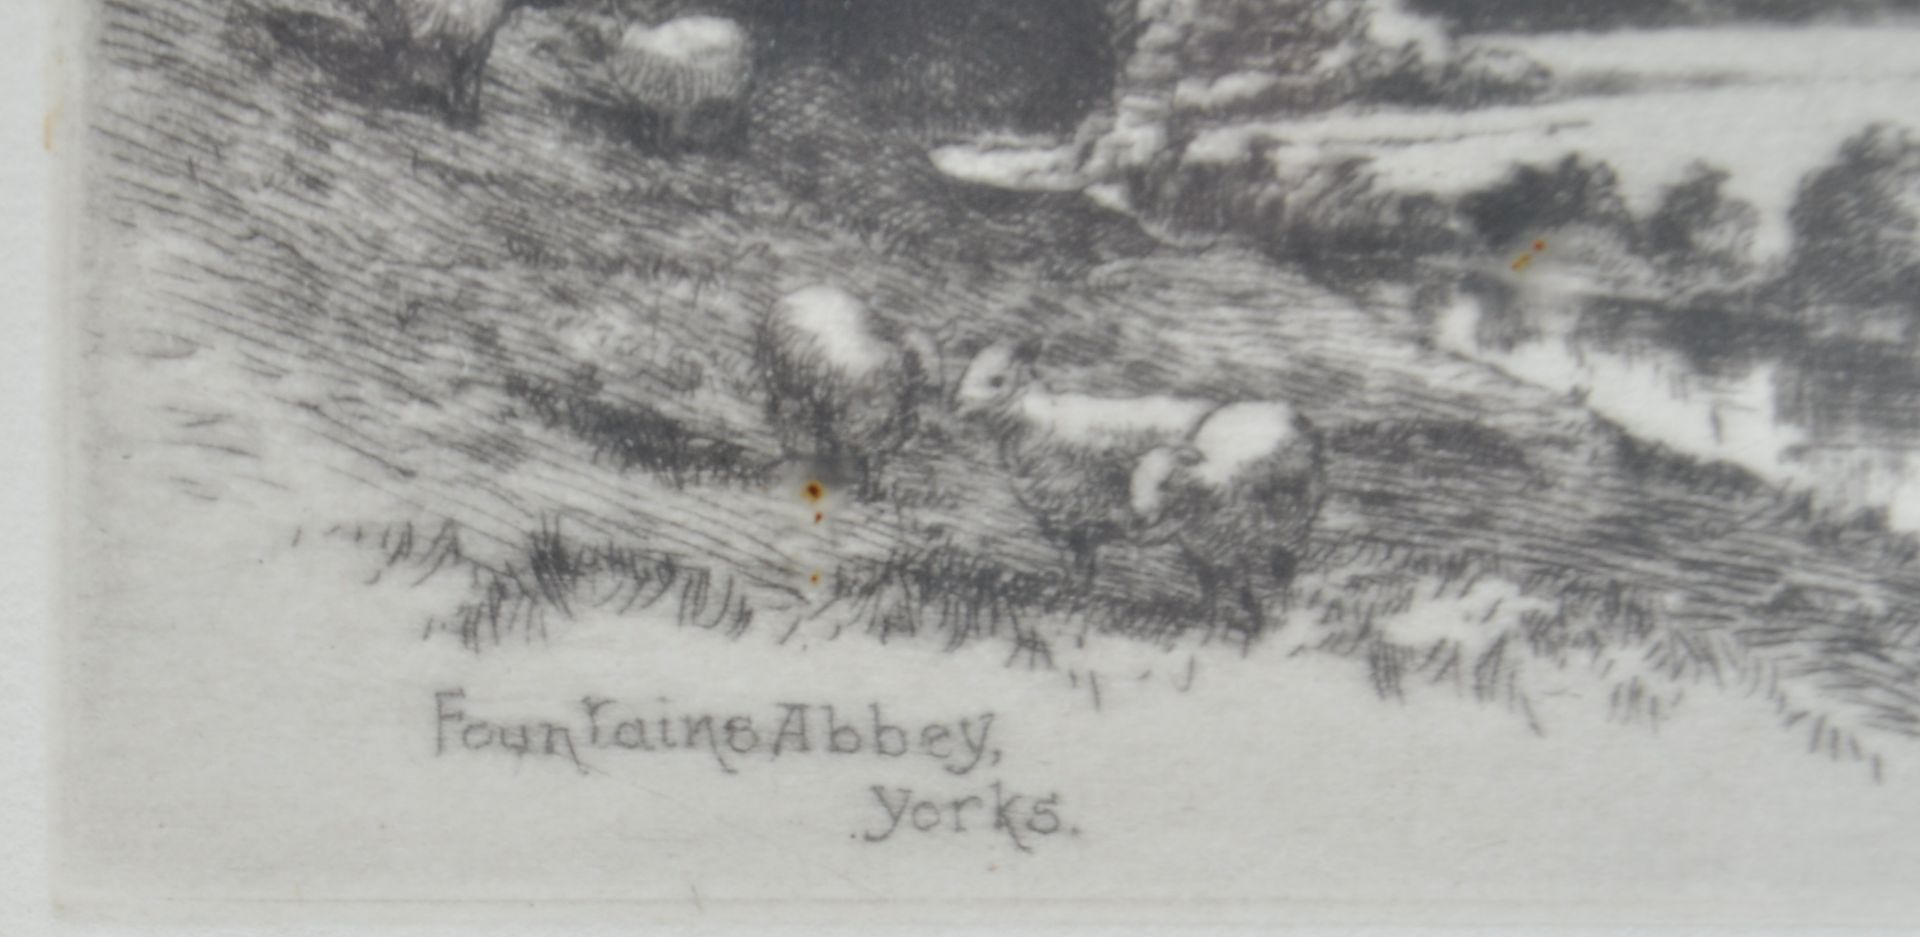 FOUNTAINS ABBEY YORKS ETCHING BY ALBANY EDWARDS - Image 2 of 6